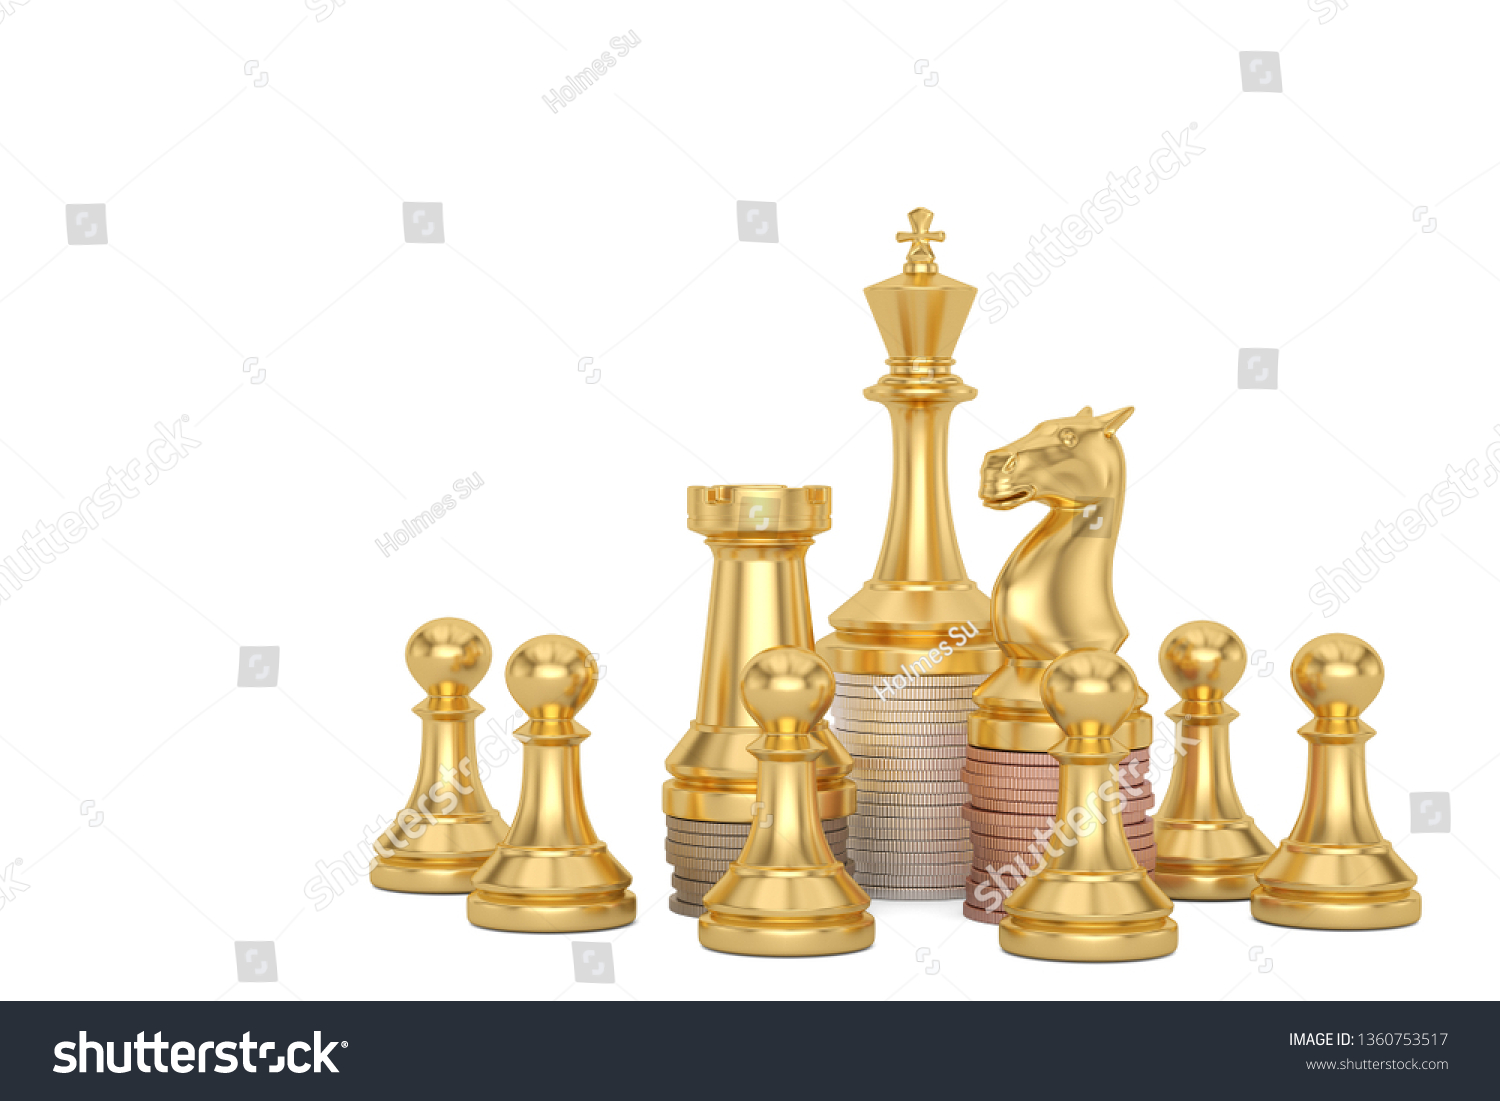 Golden chess and coin stacks  isolated on white background 3D illustration. #1360753517